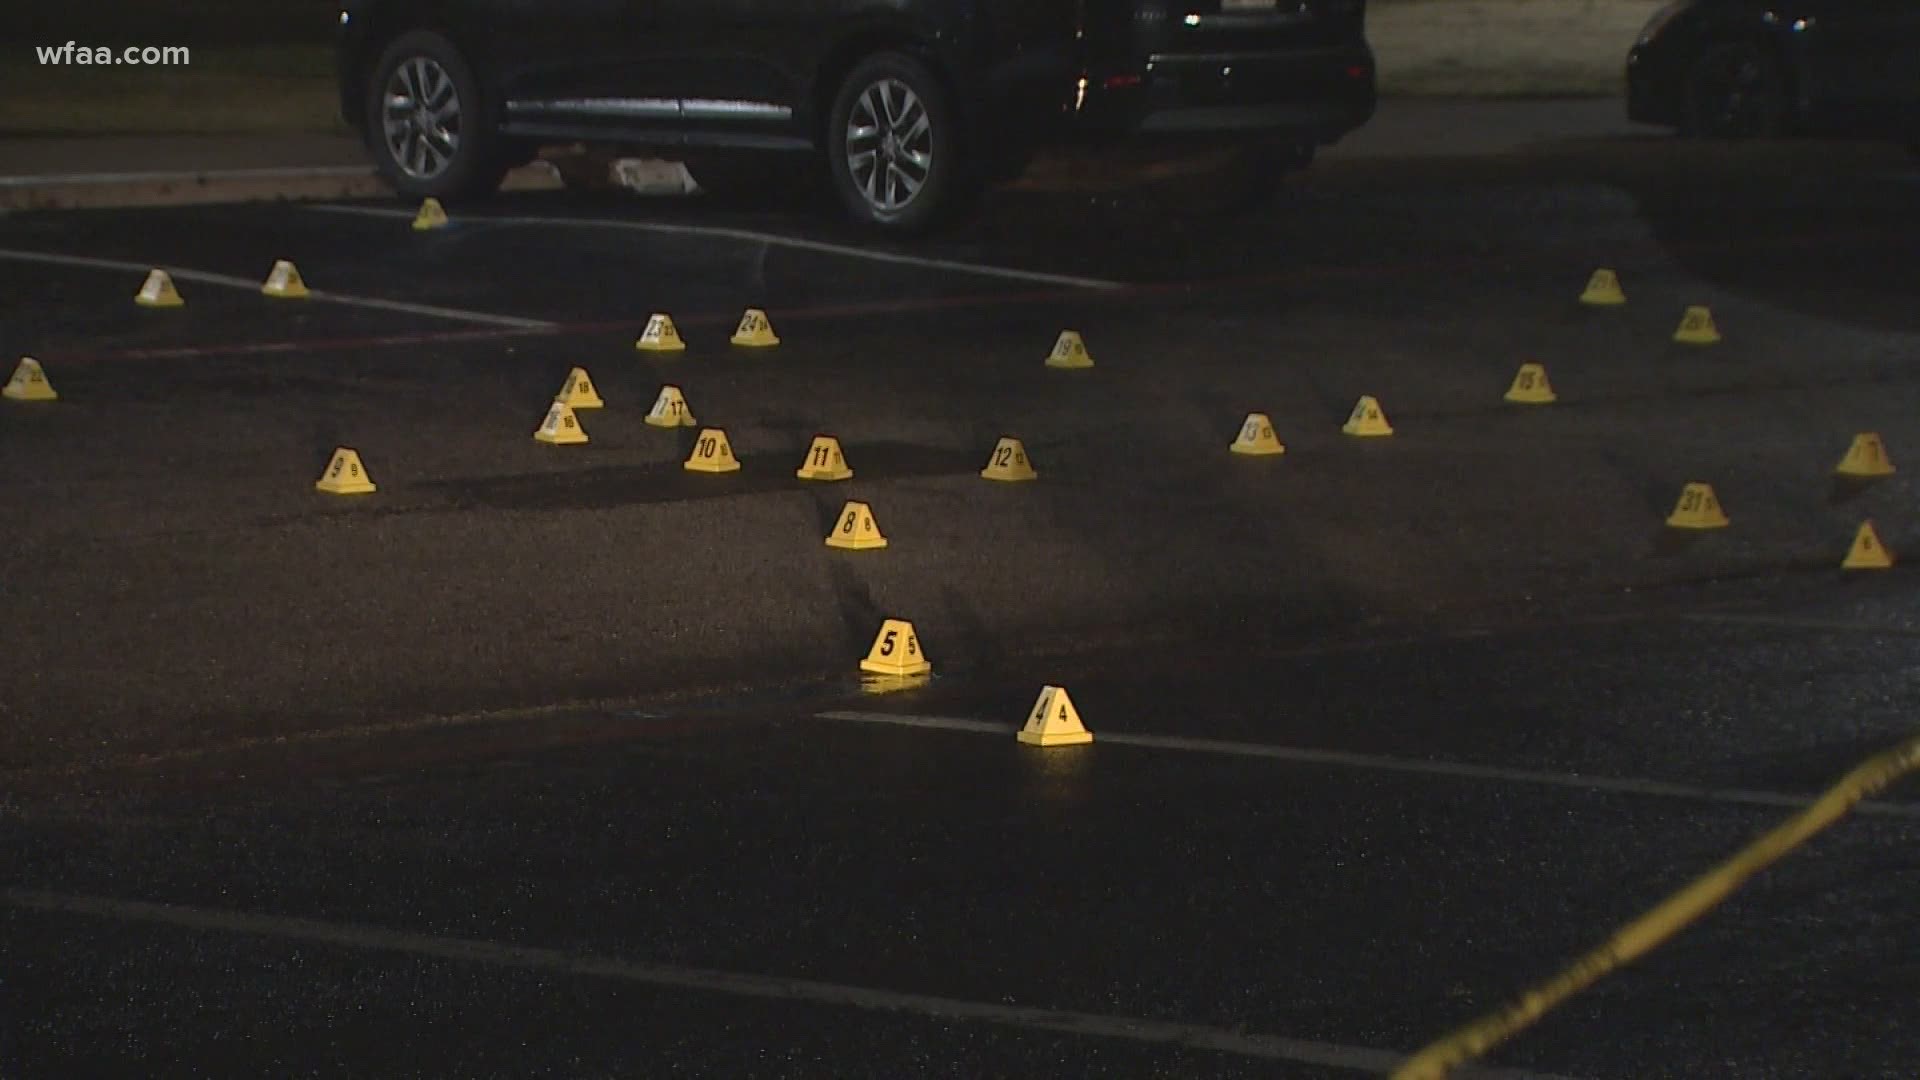 Four shootings happened in Arlington on New Year's Eve, all involving weapons intended to celebrate the new year.